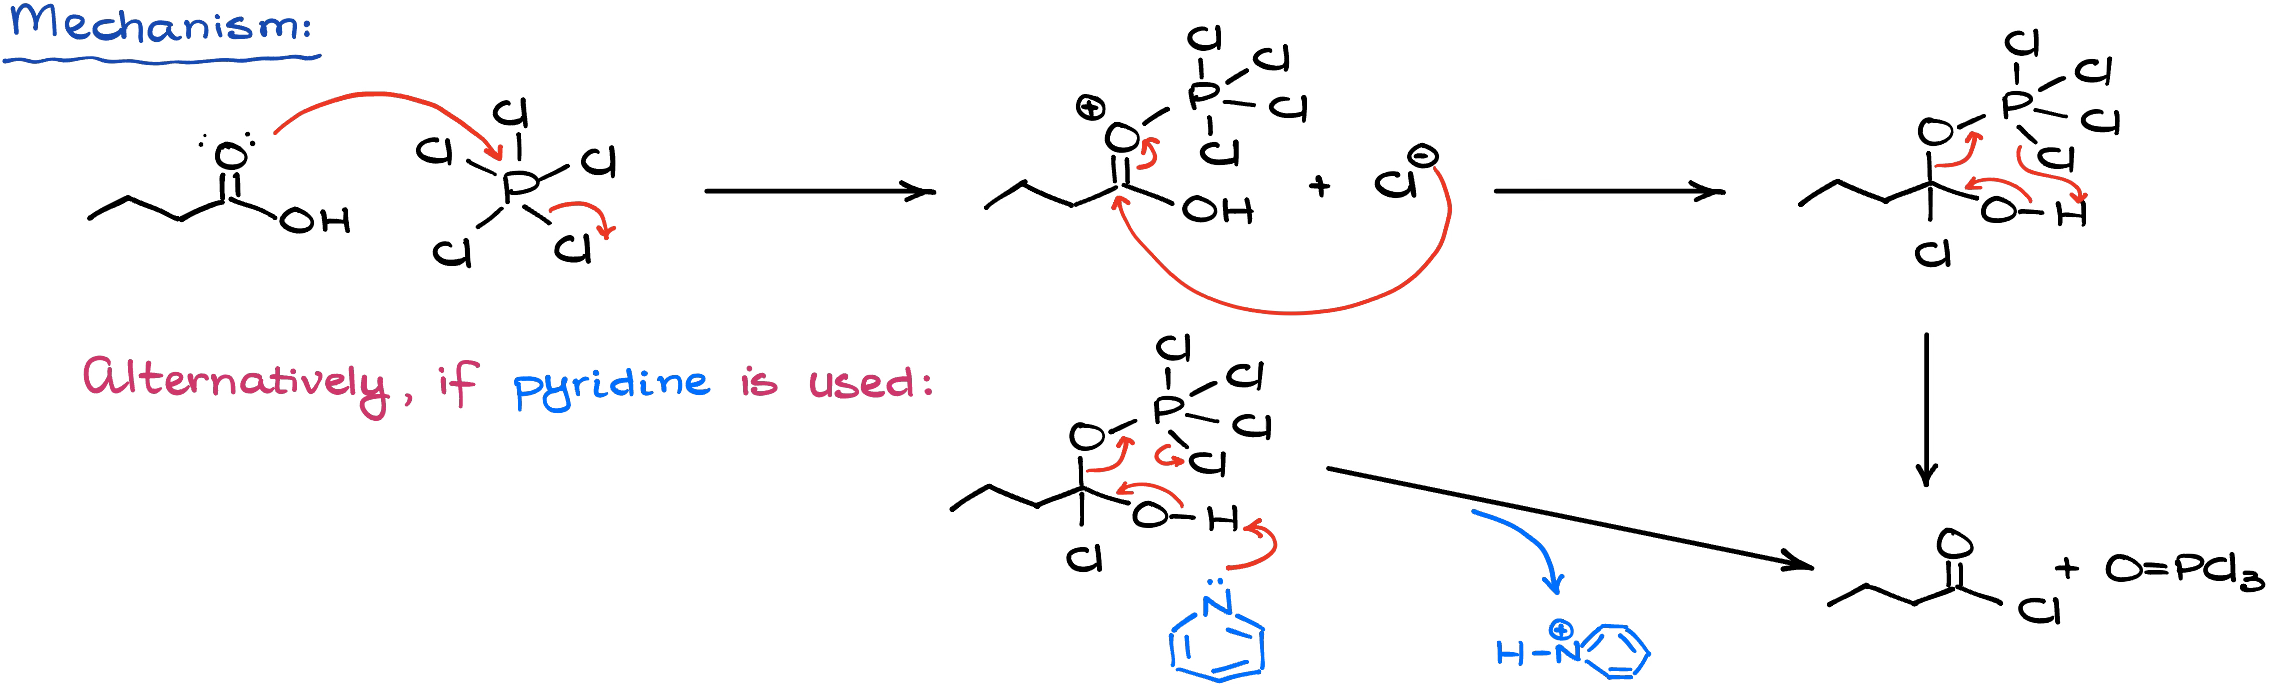 mechanism of the reaction with phosphorous pentachloride